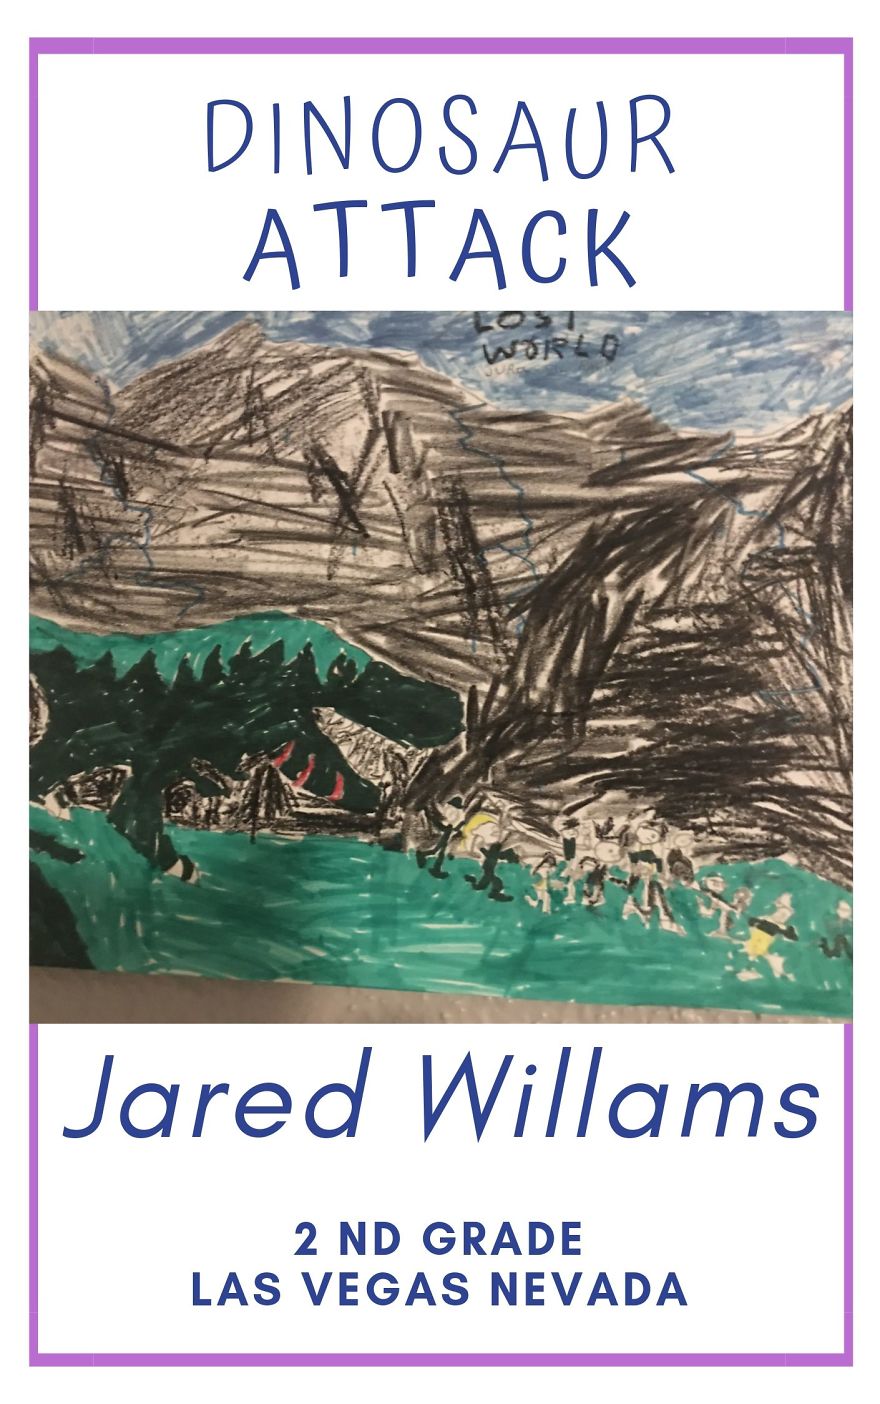 10 Elementary Kids Illustrated & Wrote Their Own Books With The Winning Words Project.